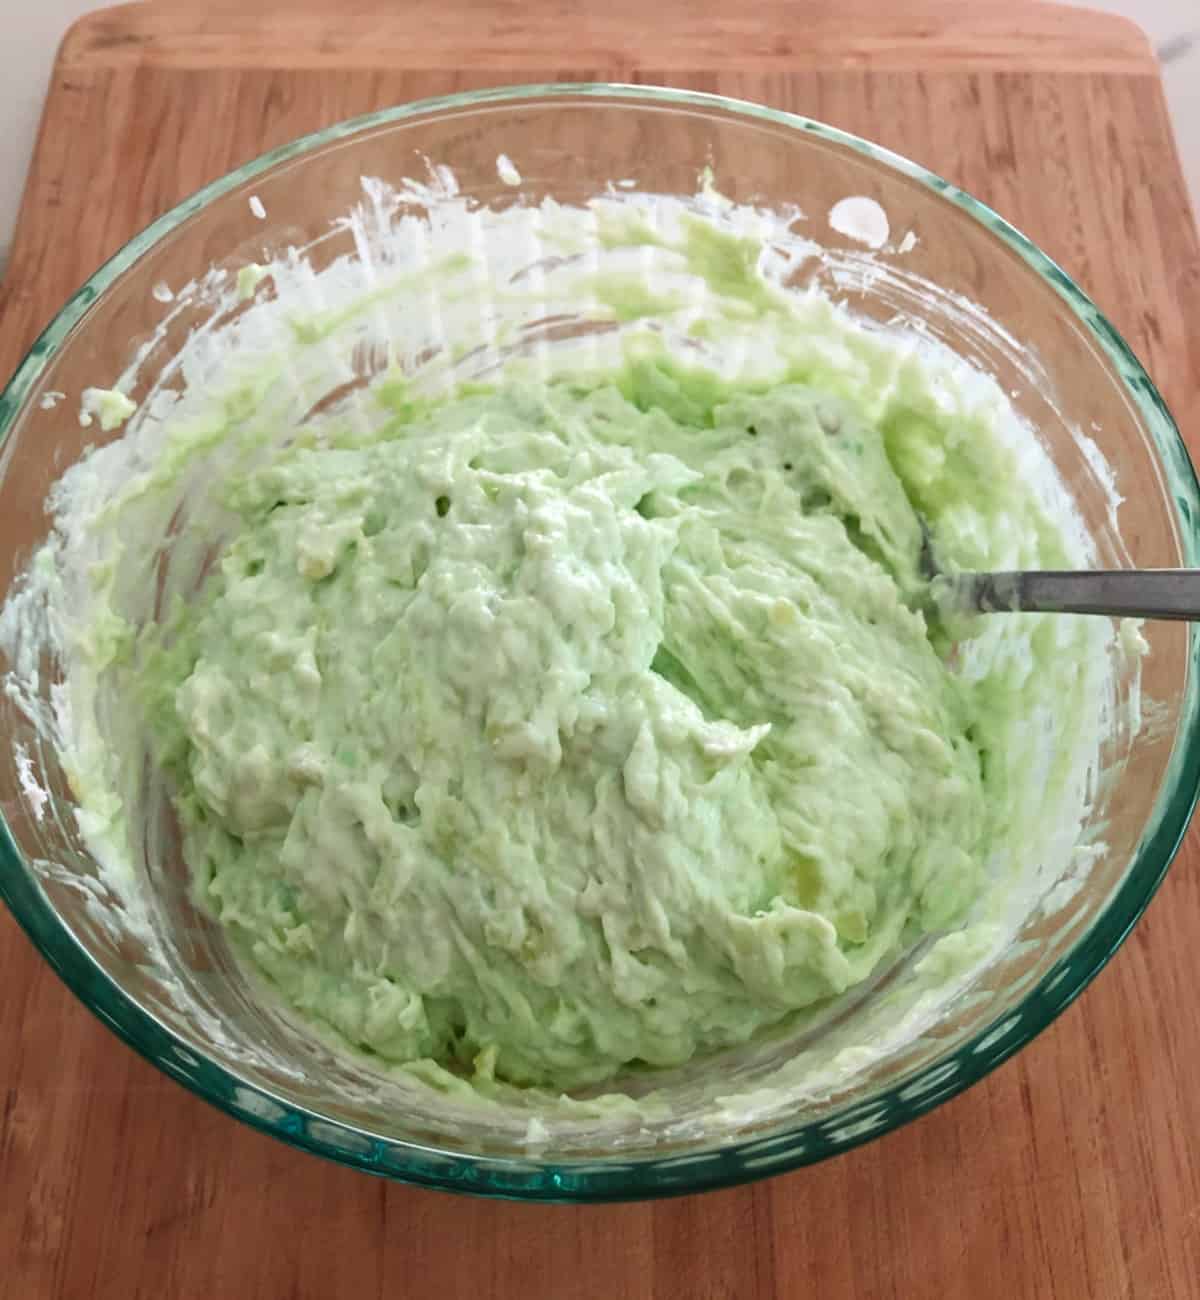 Mixing Watergate salad in glass bowl with spoon.